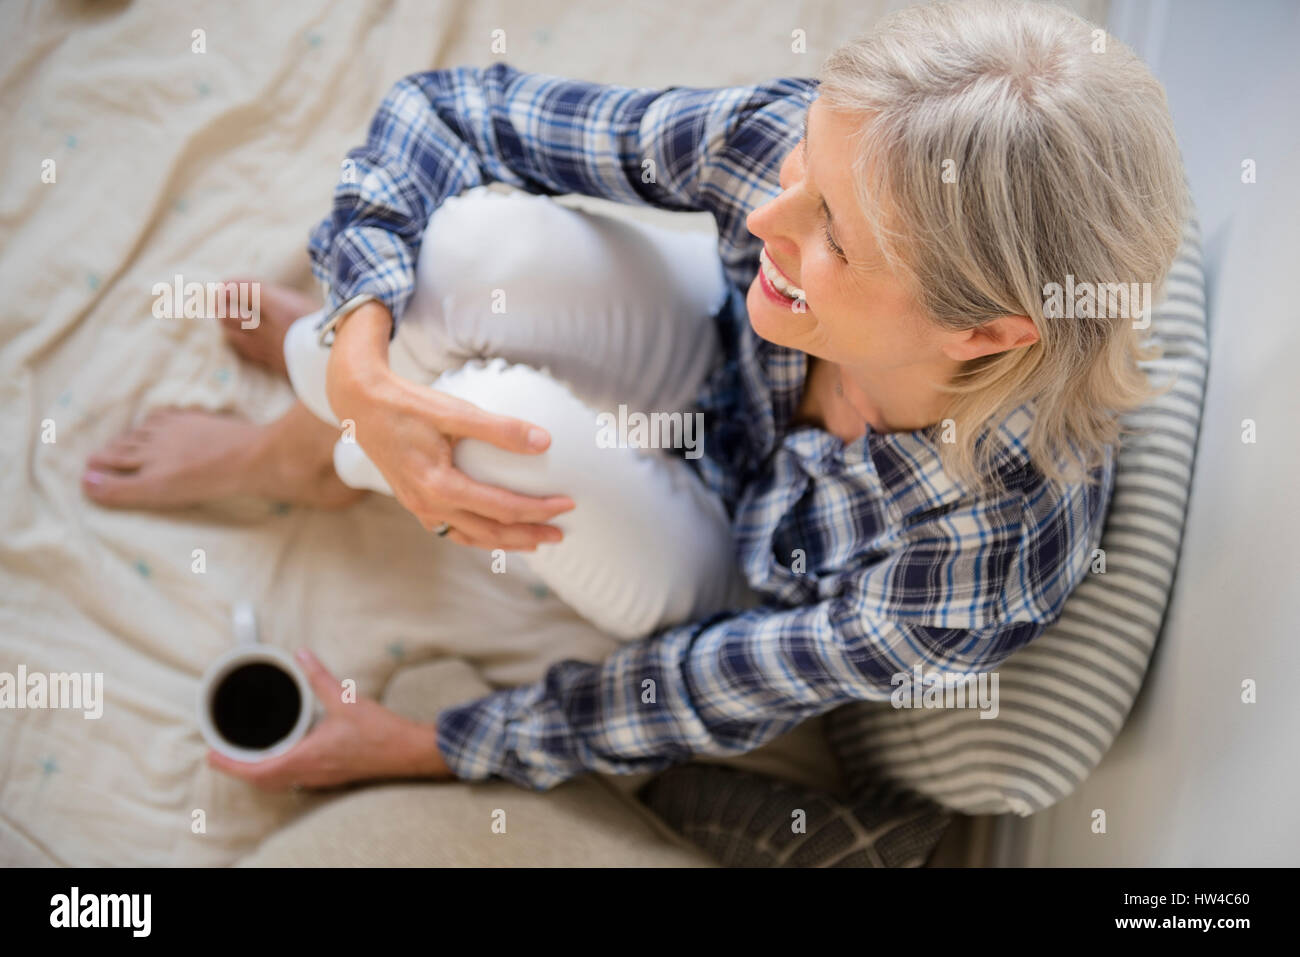 Caucasian woman sitting on bed drinking coffee Stock Photo